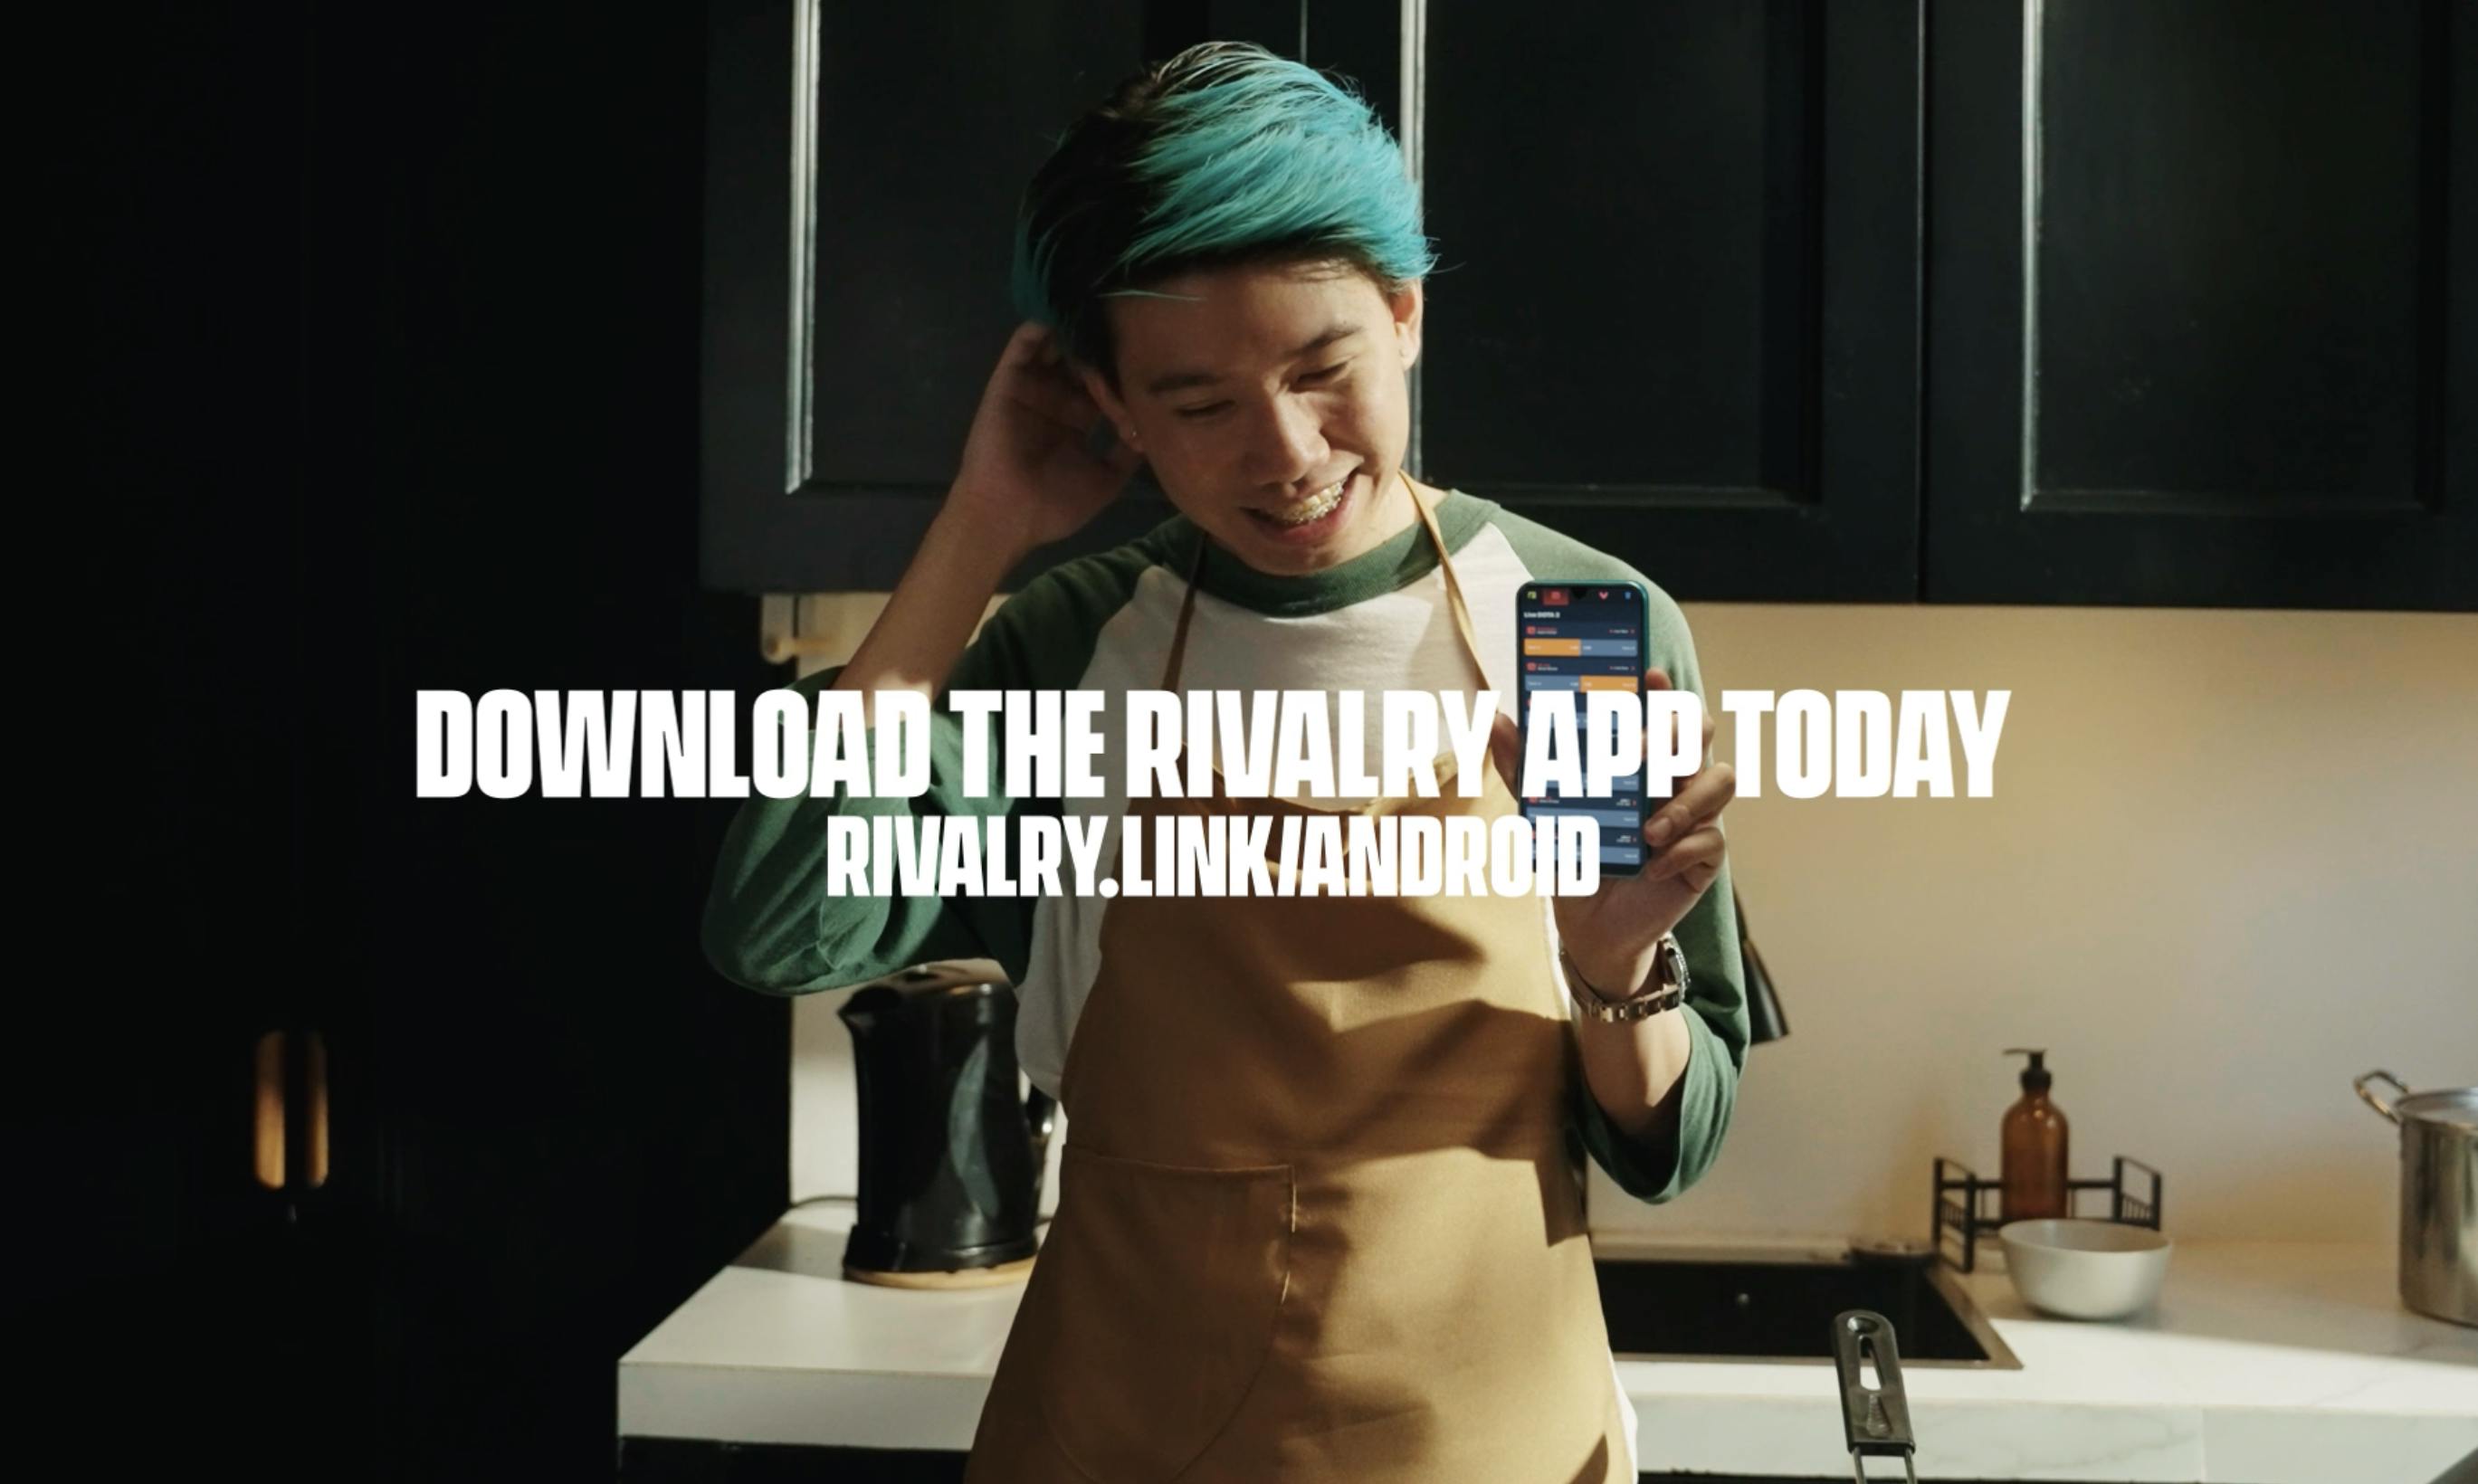 Rivalry Android App, presented by Kuku